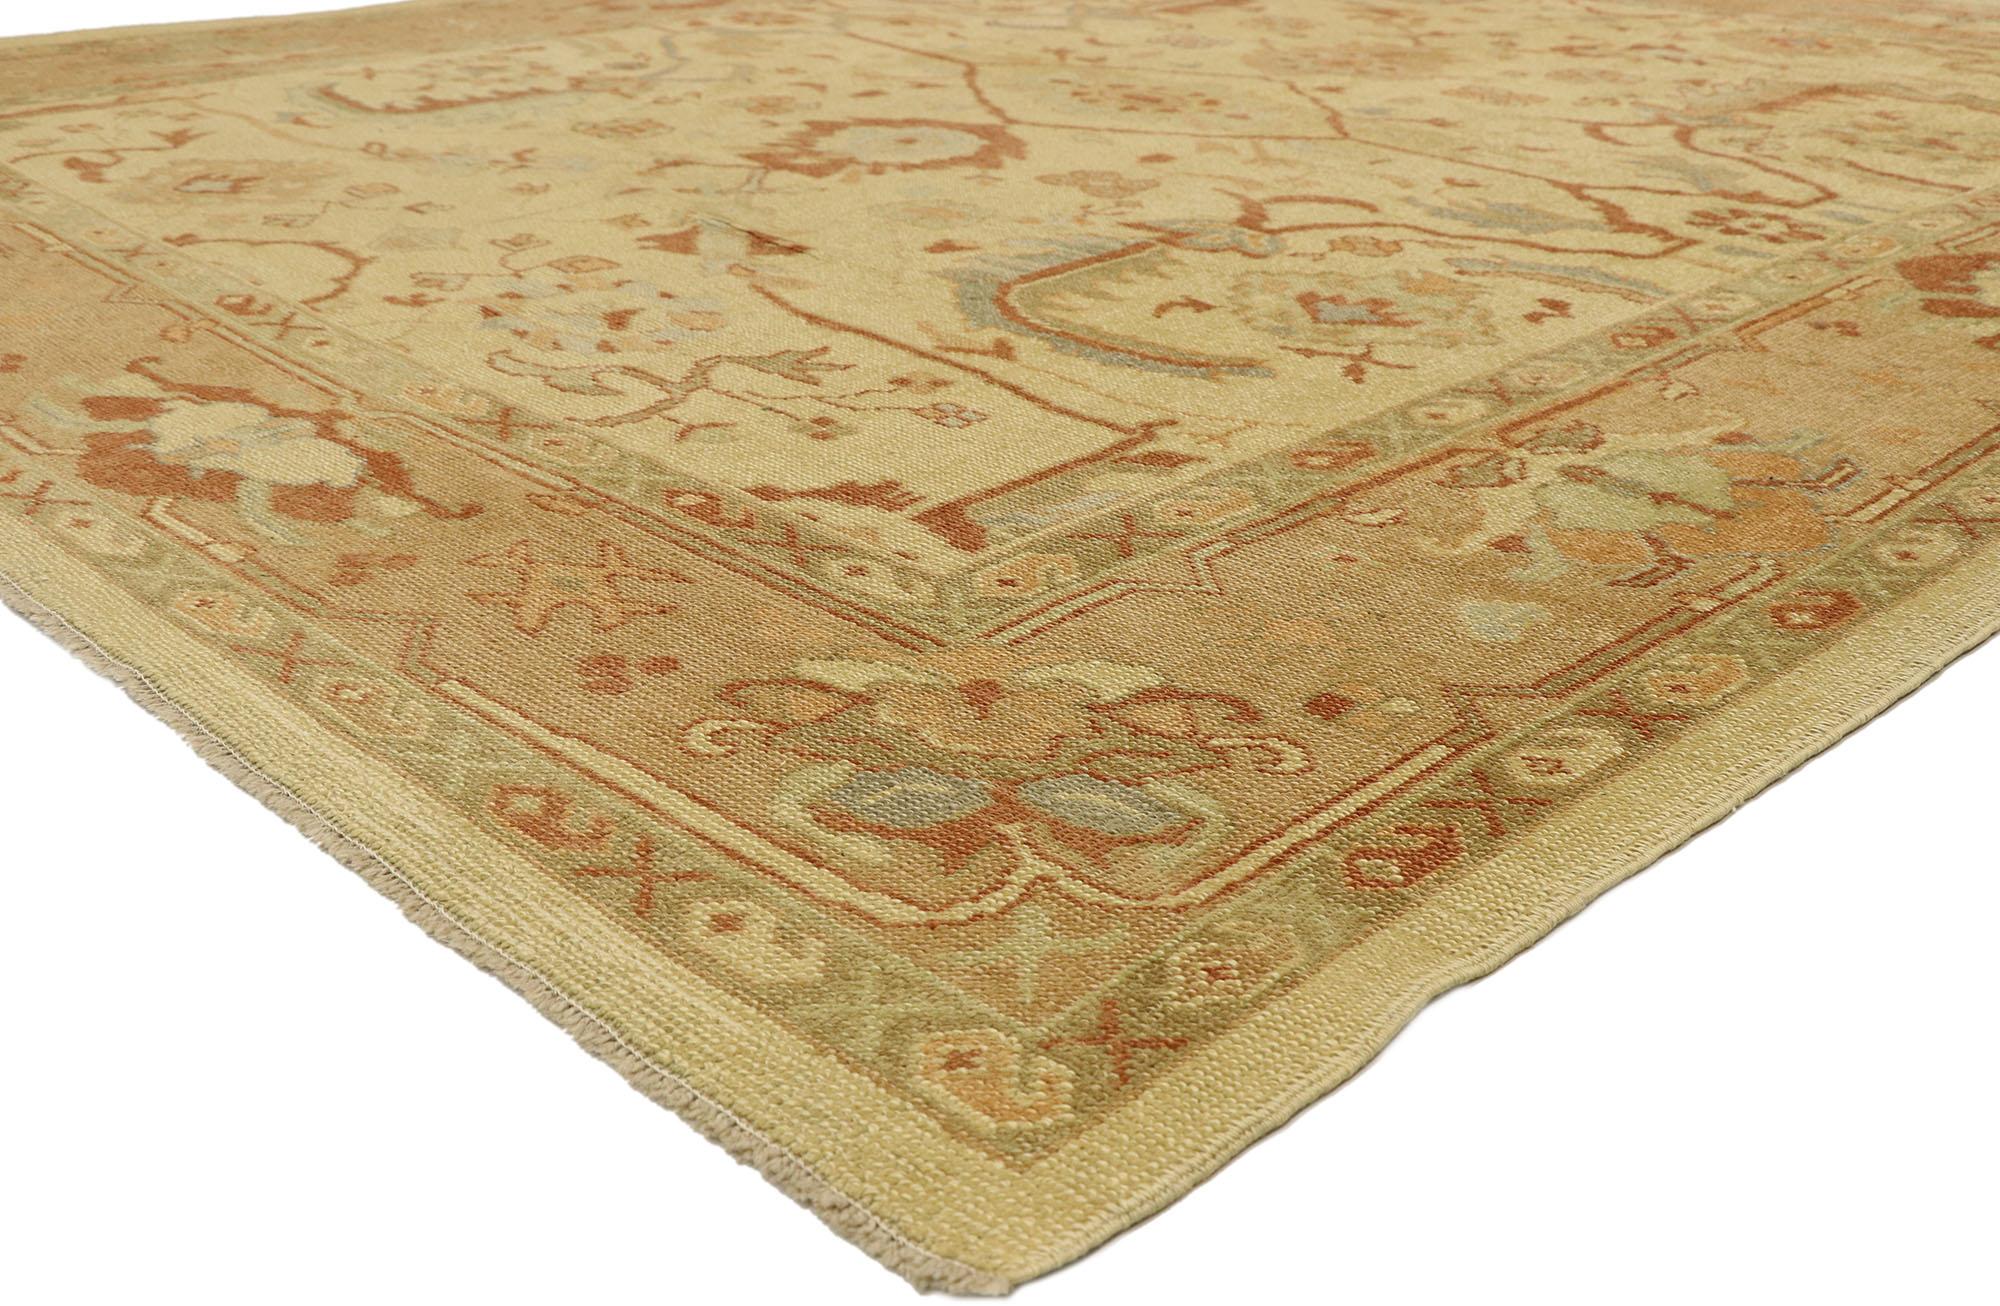 51862, new Turkish Oushak Area rug with Arts & Crafts style. This hand knotted wool new contemporary Turkish Oushak rug features a large-scale Herati pattern spread across an abrashed champagne colored field. The Classic Herati pattern, also known